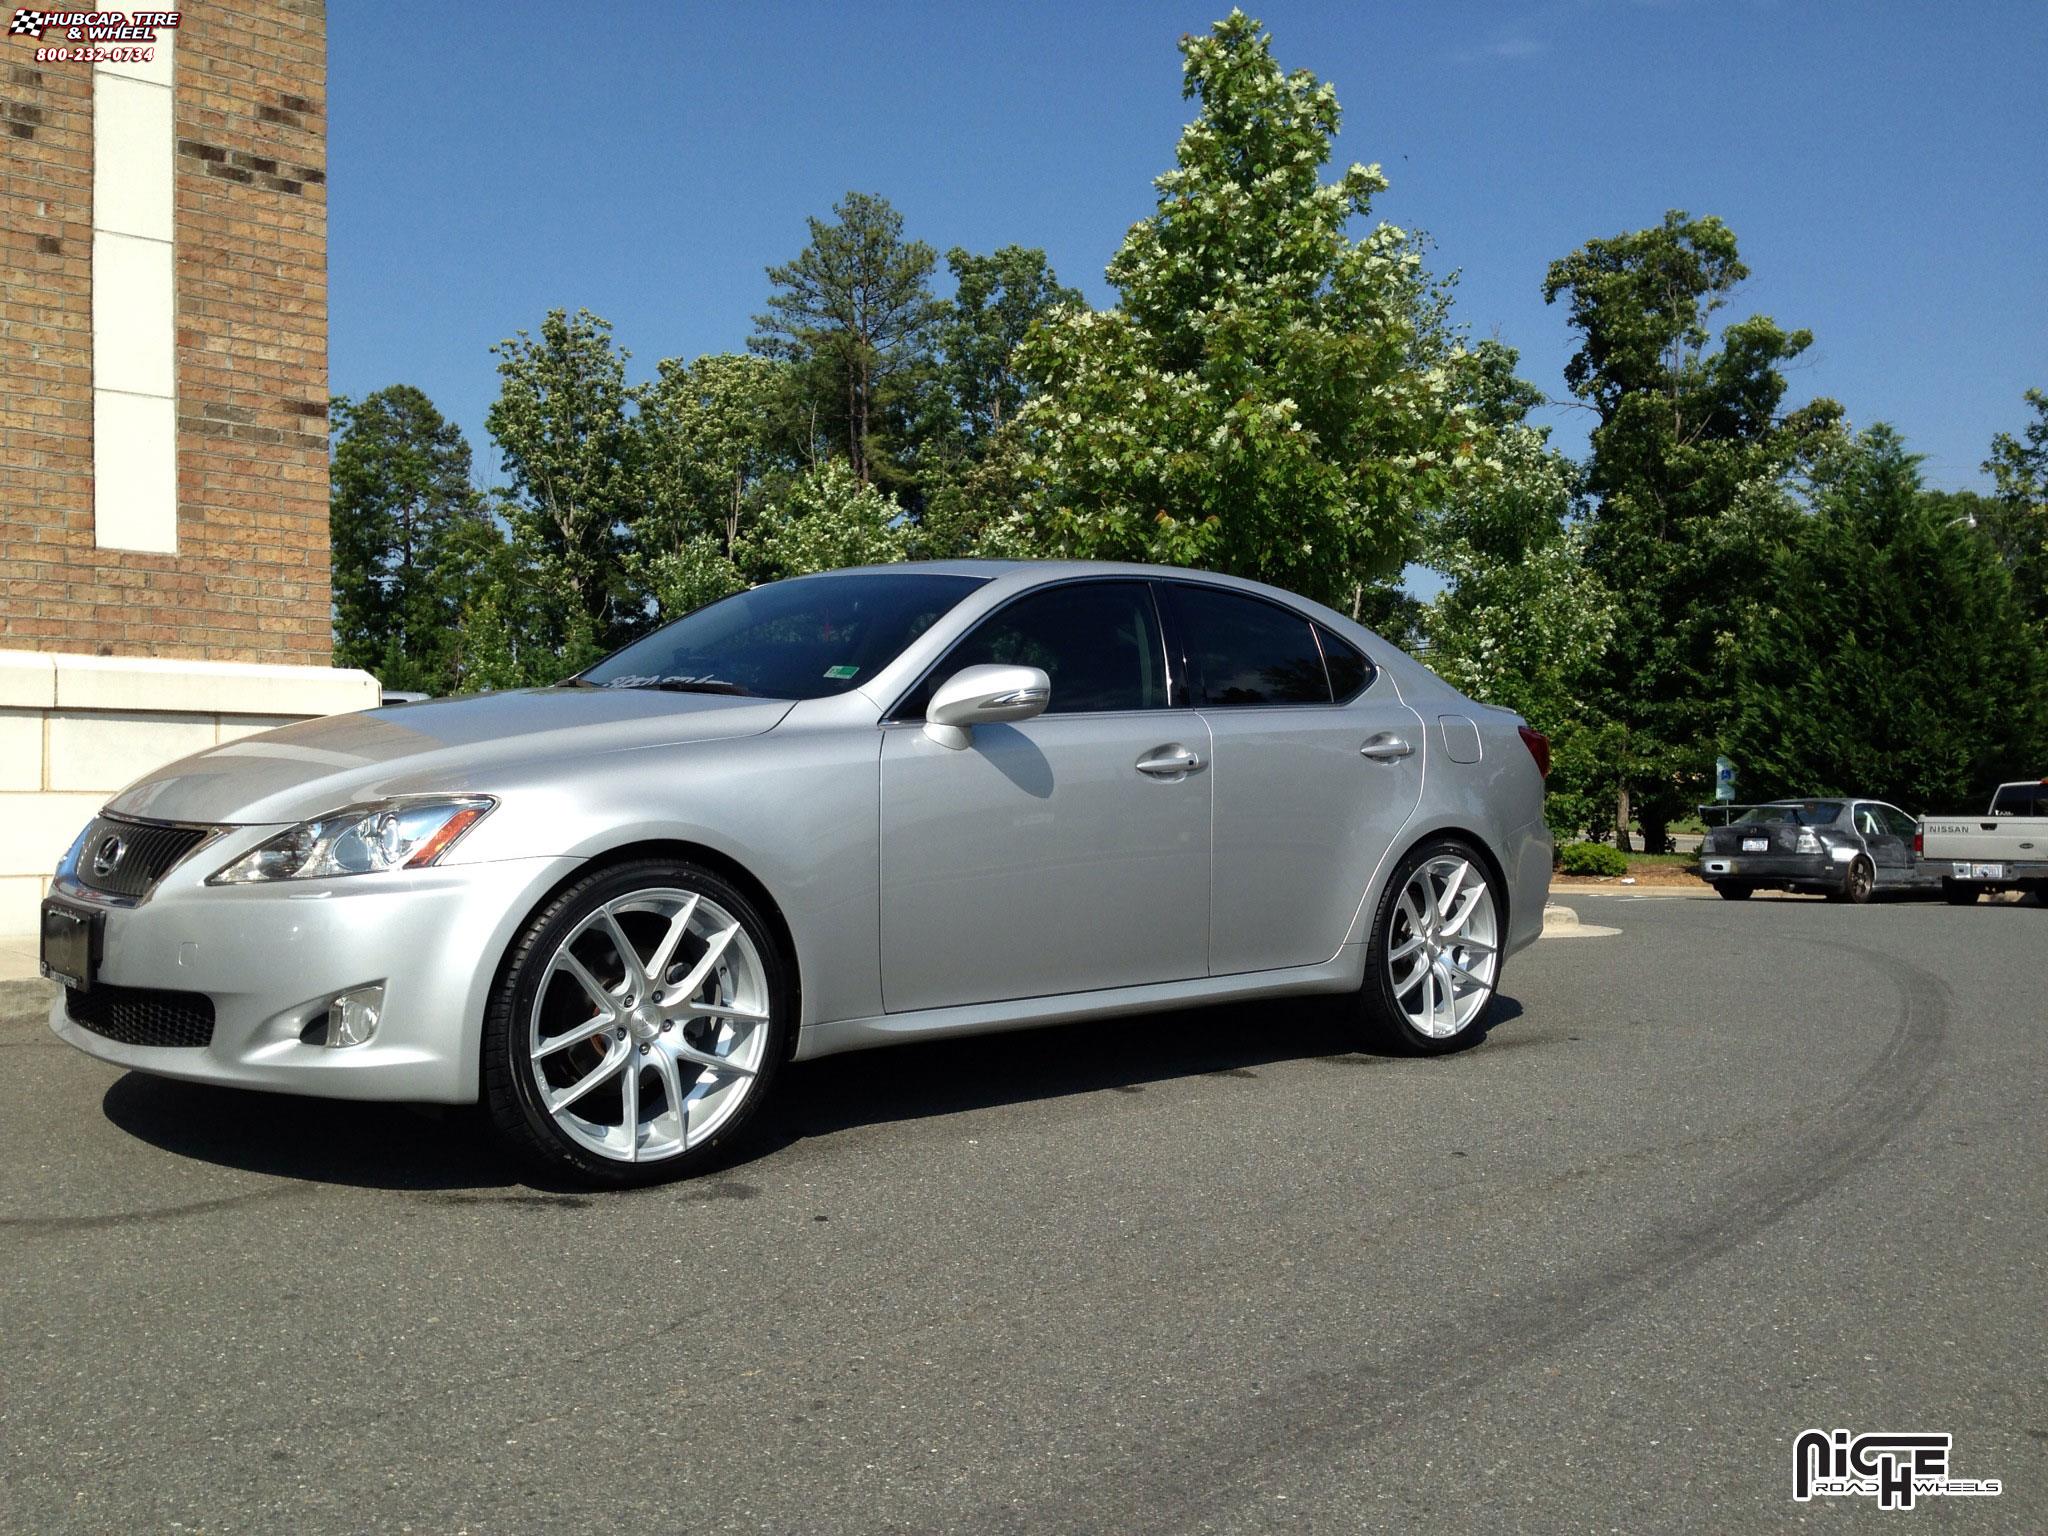 vehicle gallery/lexus is250 niche targa m131  Silver & Machined wheels and rims